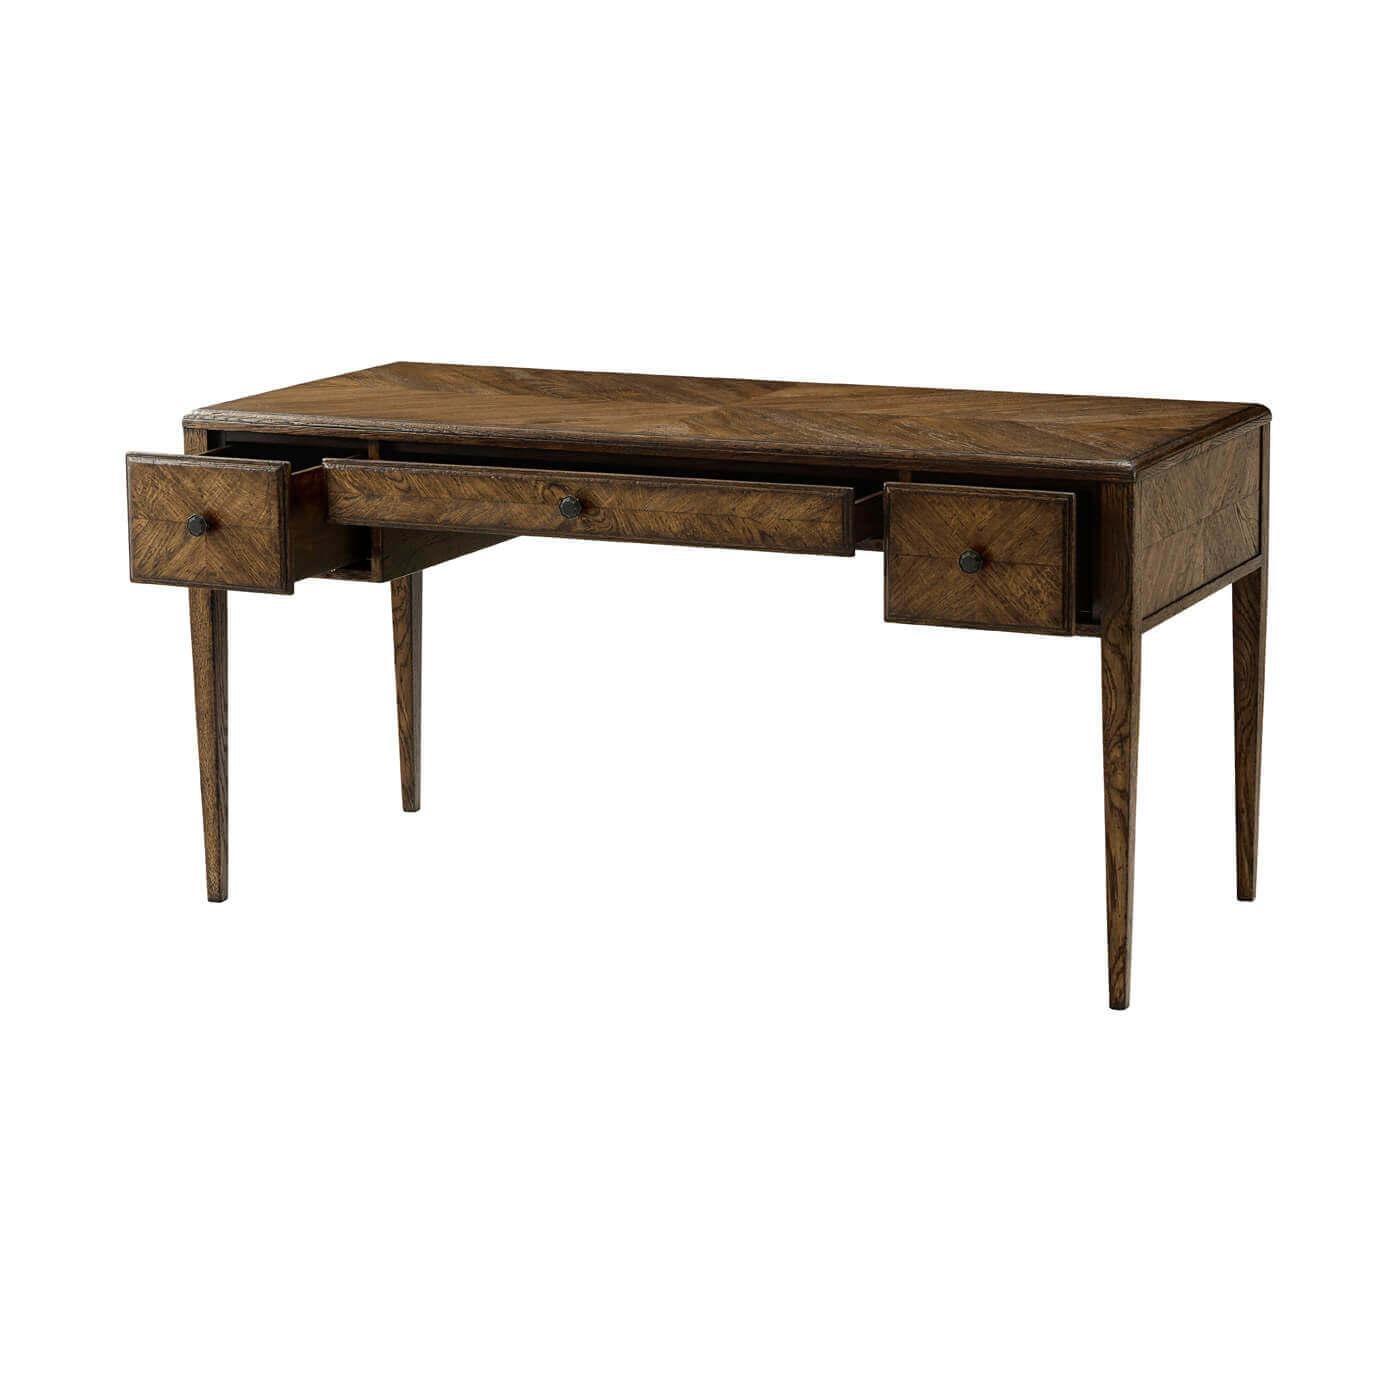 An Italian Neo-Classic style oak parquetry desk with a starburst patterned oak parquetry top to bottom. It has a central drawer flanked by two further additions. It rests on tapered legs. It has an oak finish complimented with Verde Bronze finished